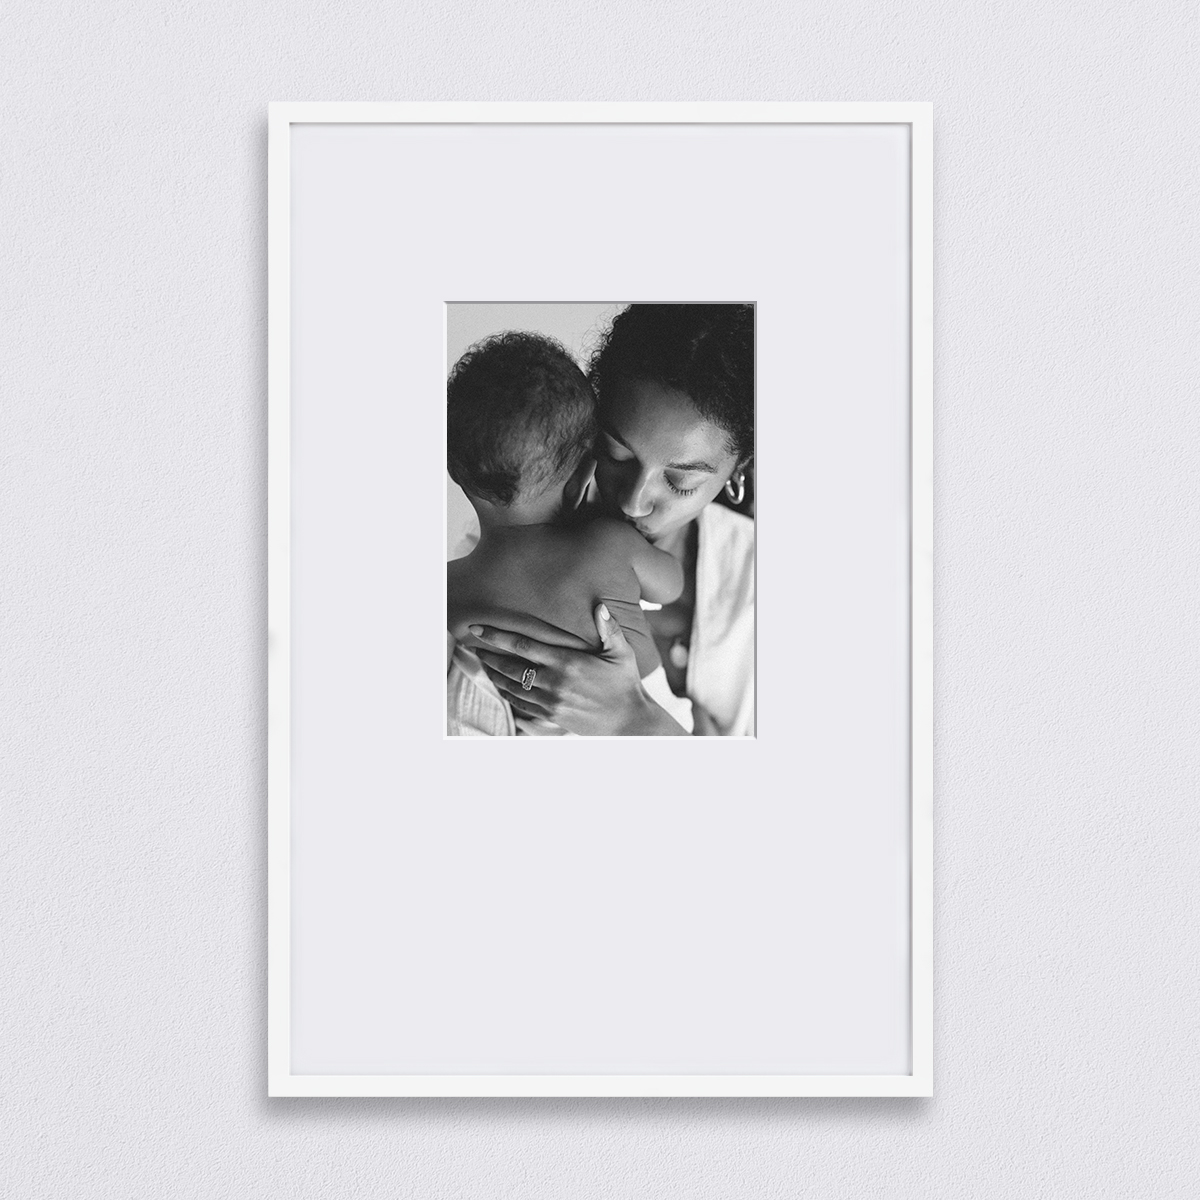 Black and white photo of mother holding newborn matted to 10 x 14 inch inside of a white 20 x 30 inch Artifact Uprising Gallery Frame